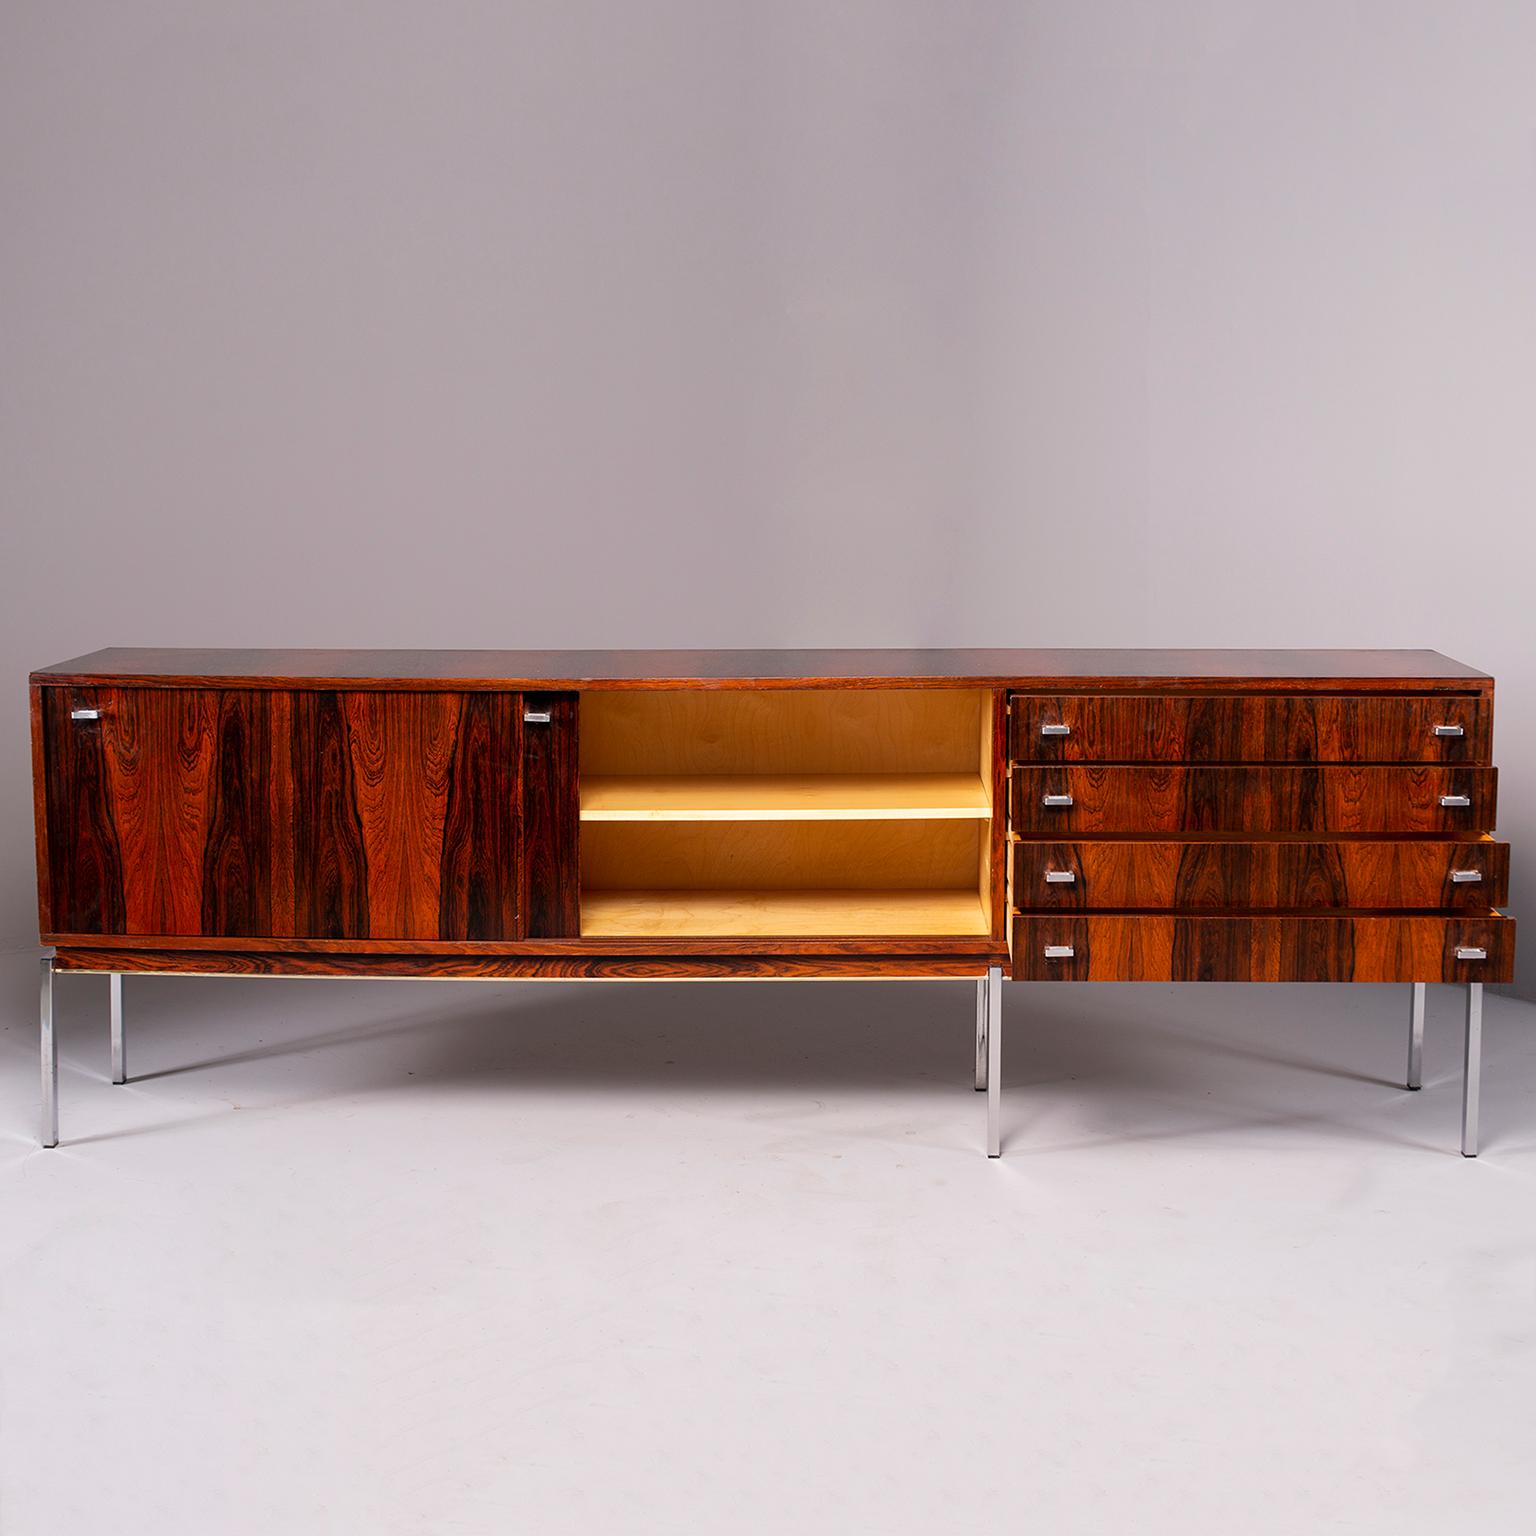 Dramatically grained French rosewood credenza or cabinet dates from the 1960s. Long and low, this versatile piece can be used in an office, dining room, or living room. Four functional drawers and two storage compartments with sliding doors. Silver